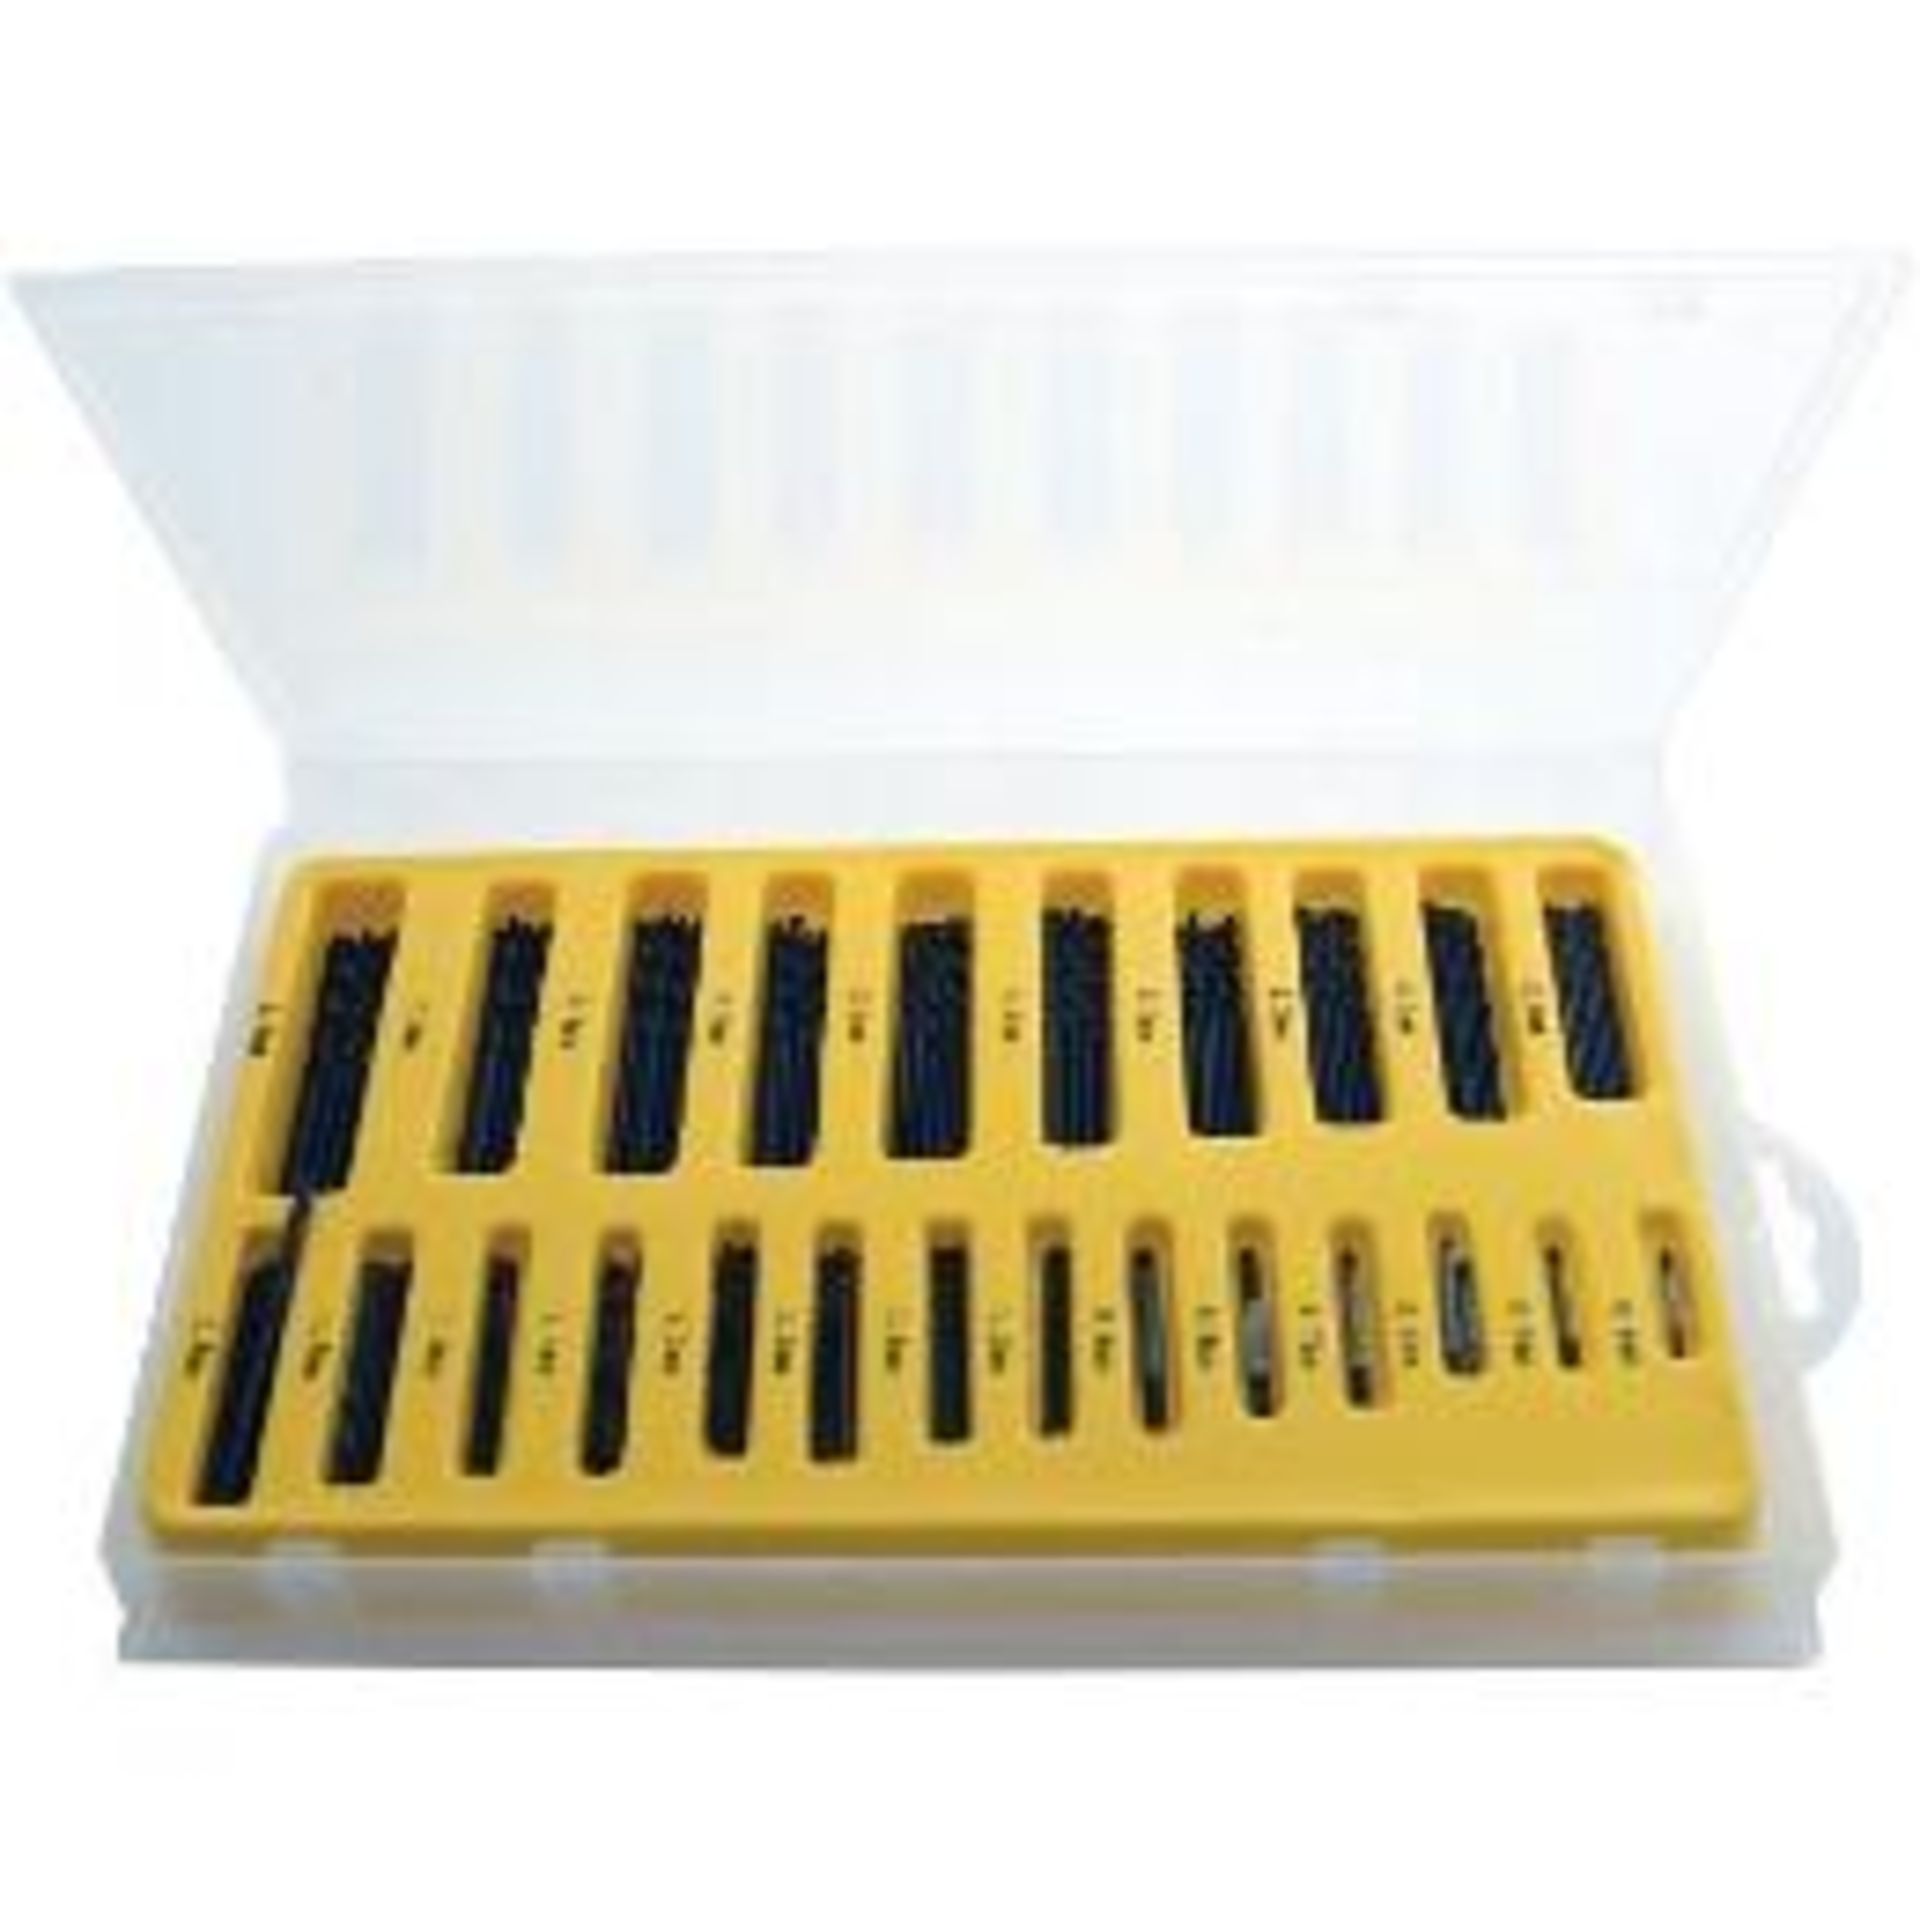 V *TRADE QTY* Brand New 150pce Drill Bit Set X 10 YOUR BID PRICE TO BE MULTIPLIED BY TEN